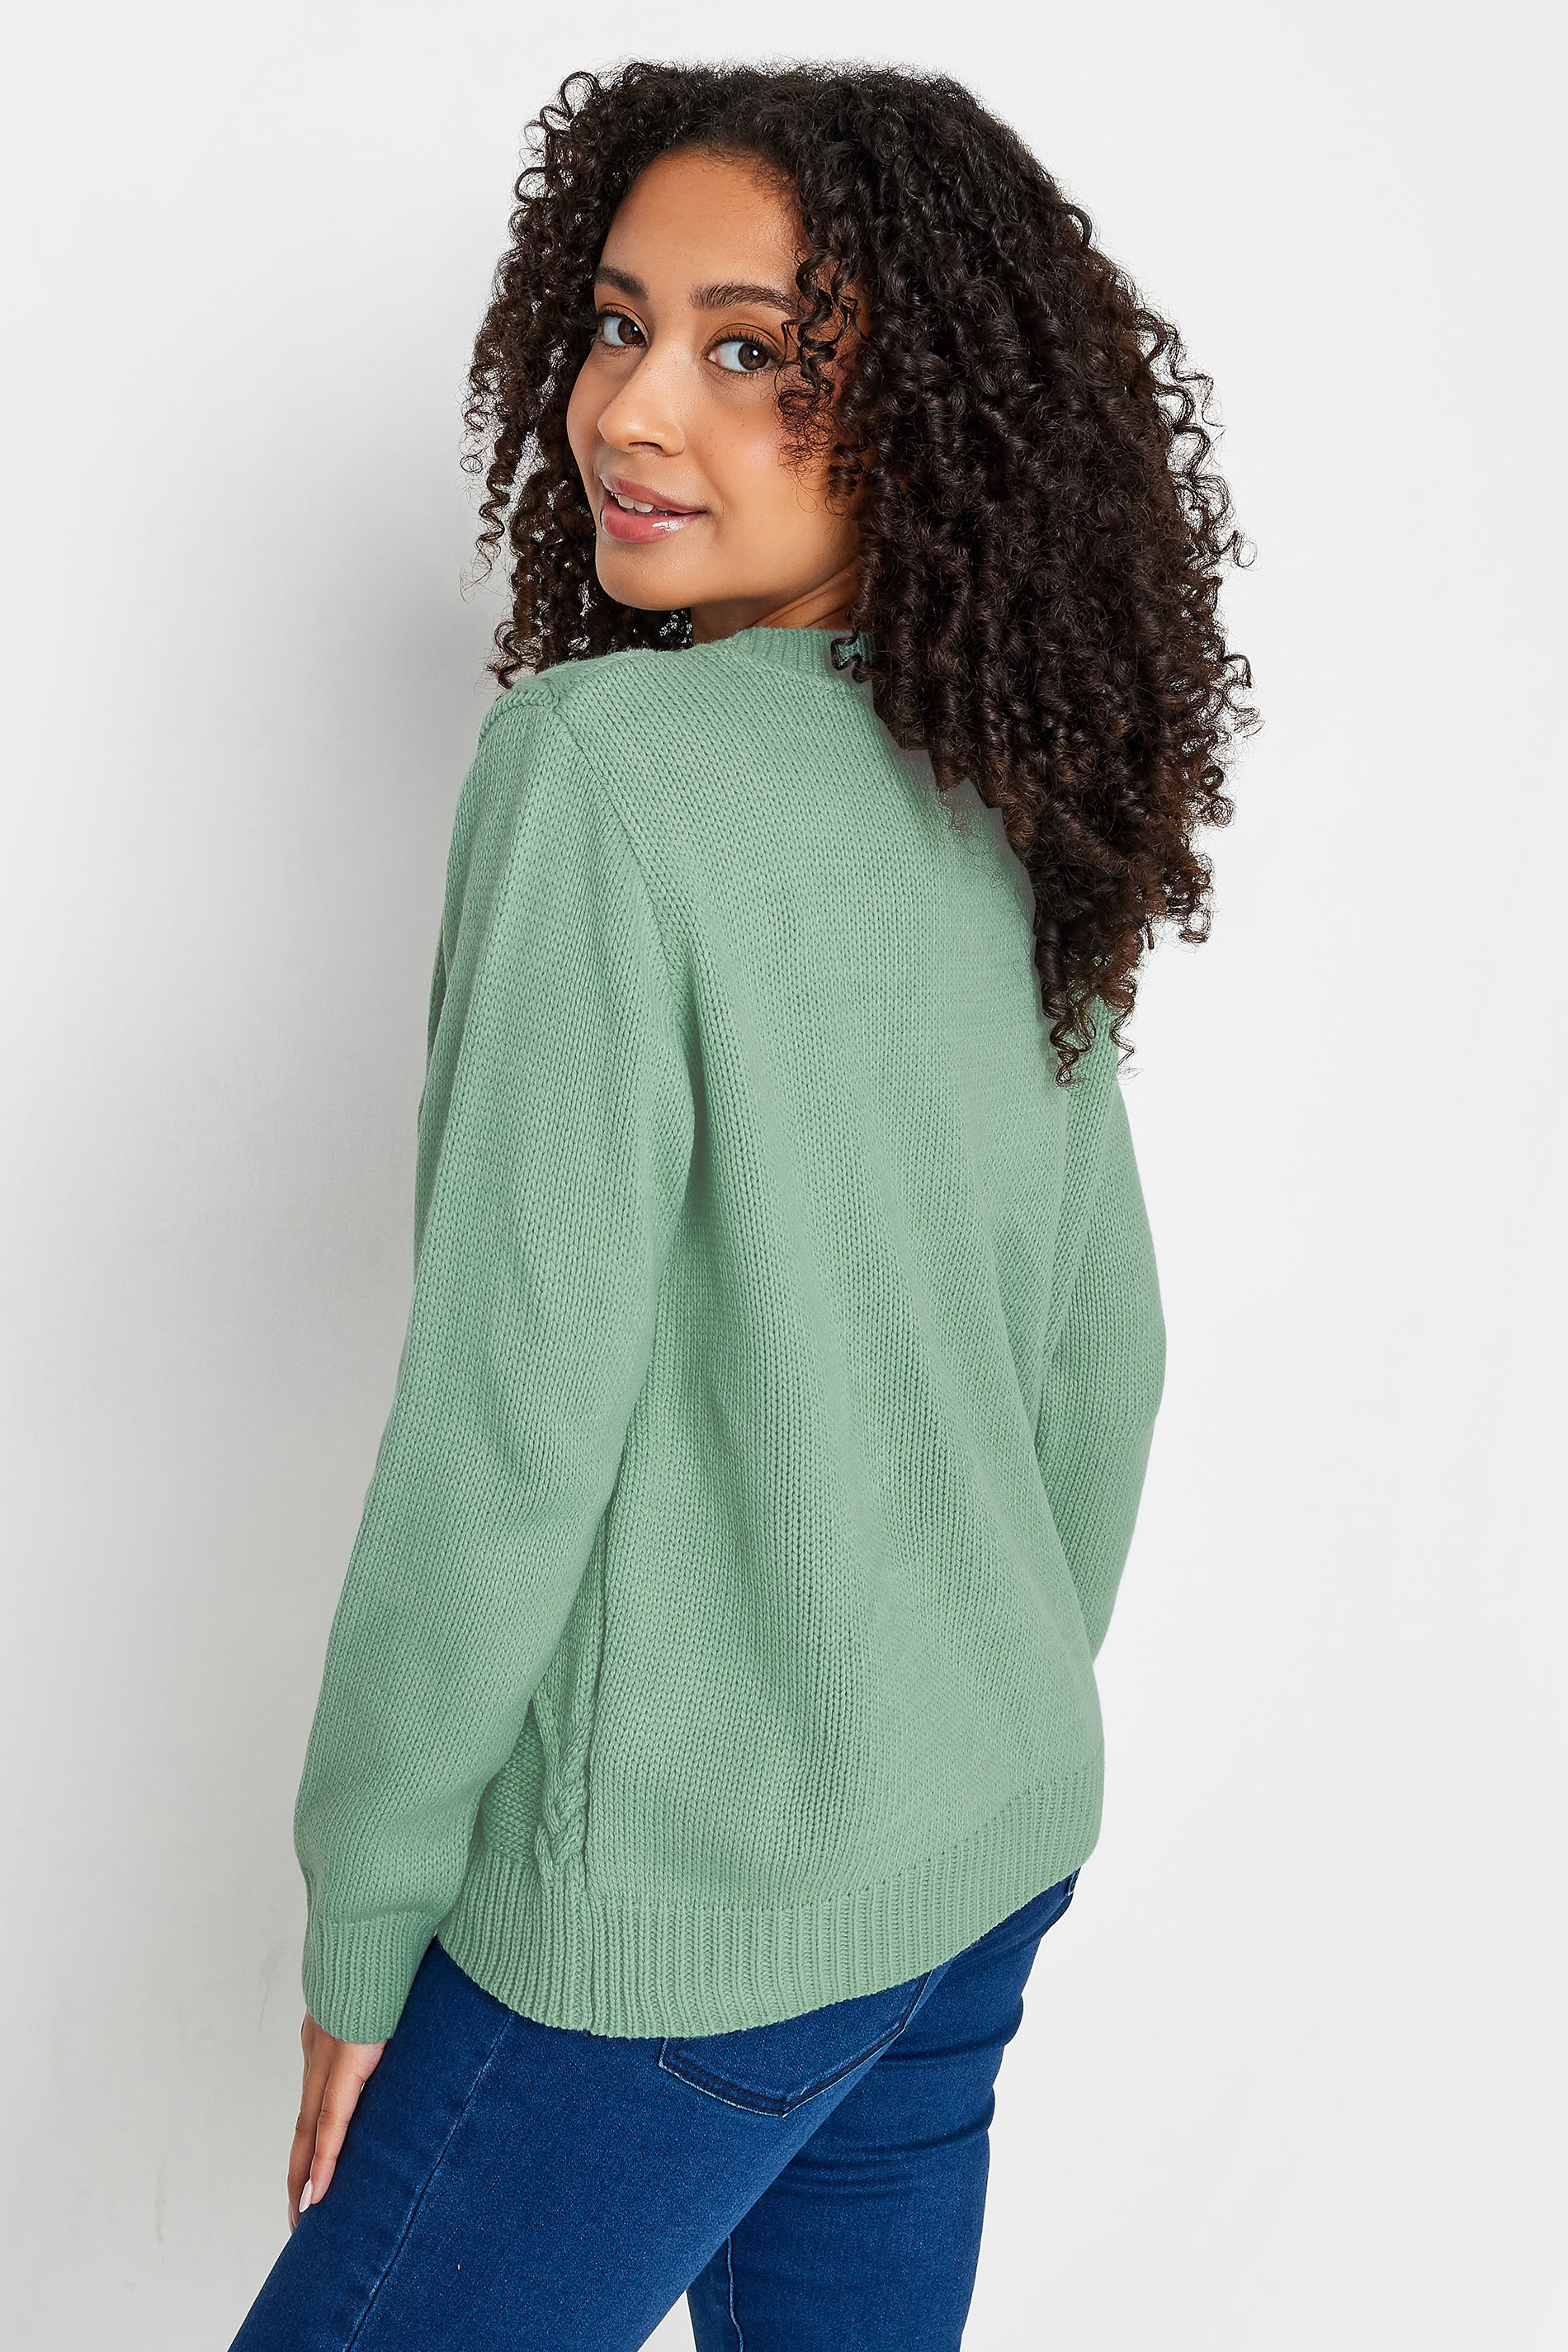 M&Co Petite Light Green Cable Knit Jumper | M&Co 2